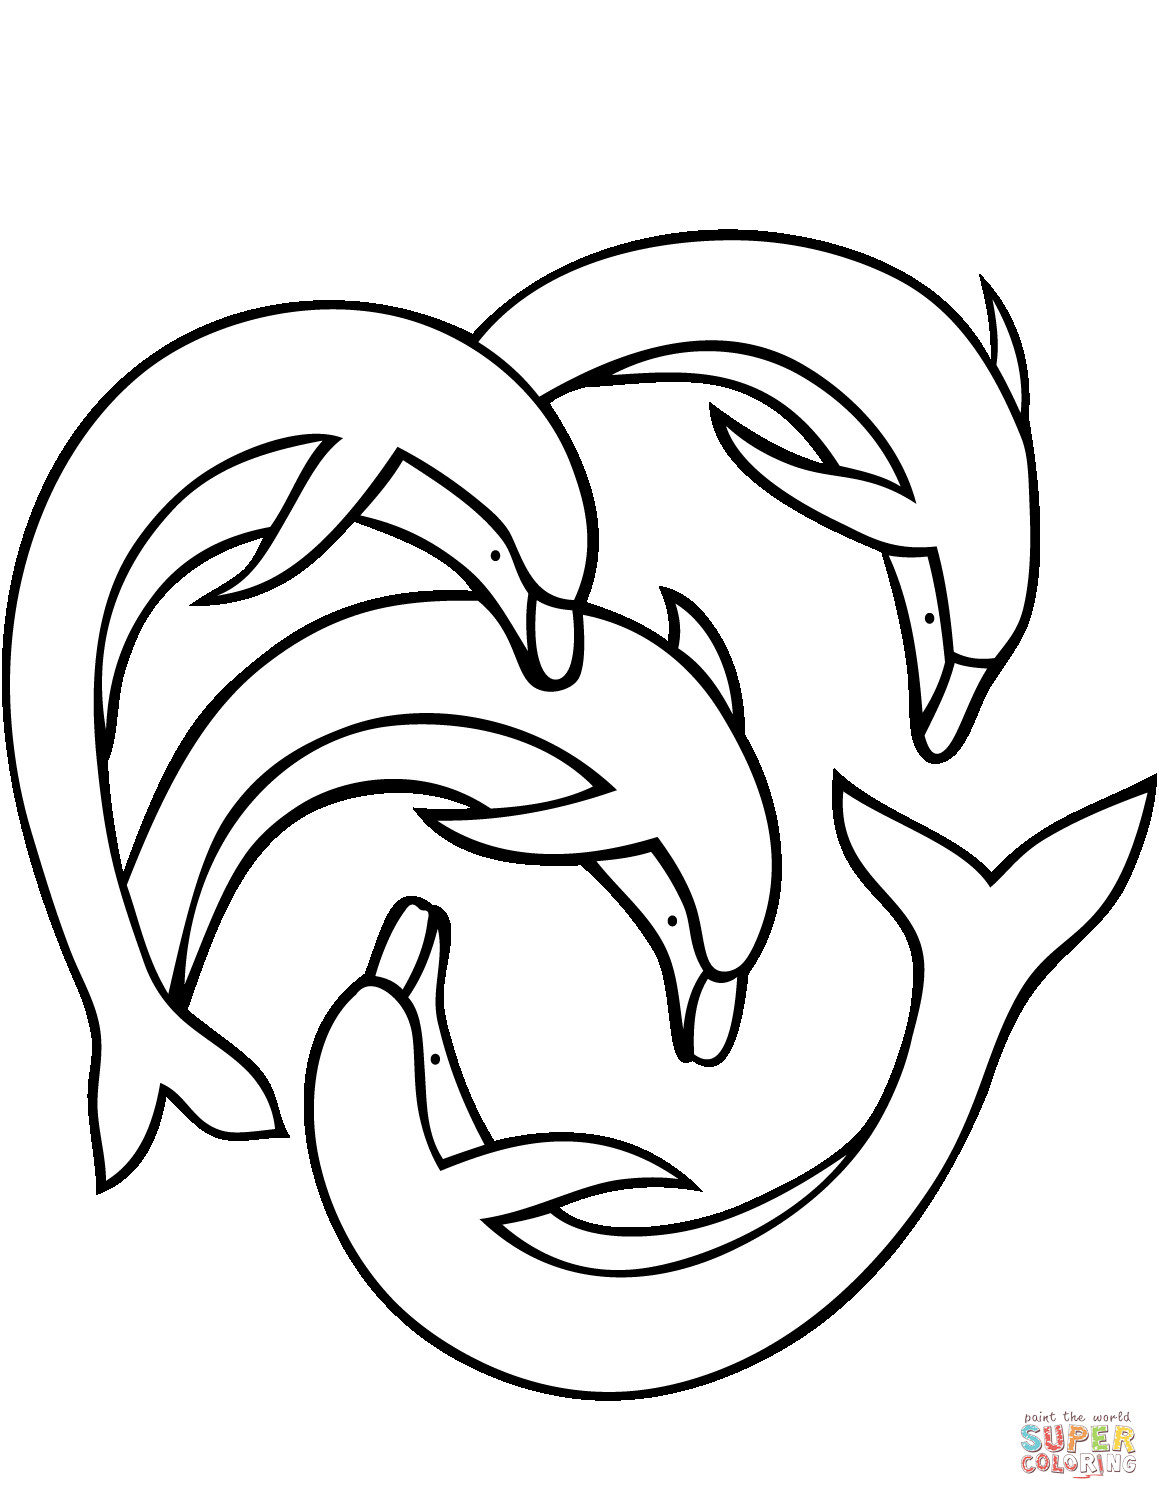 Dolphin Coloring Pages Printable
 Four Dolphins coloring page